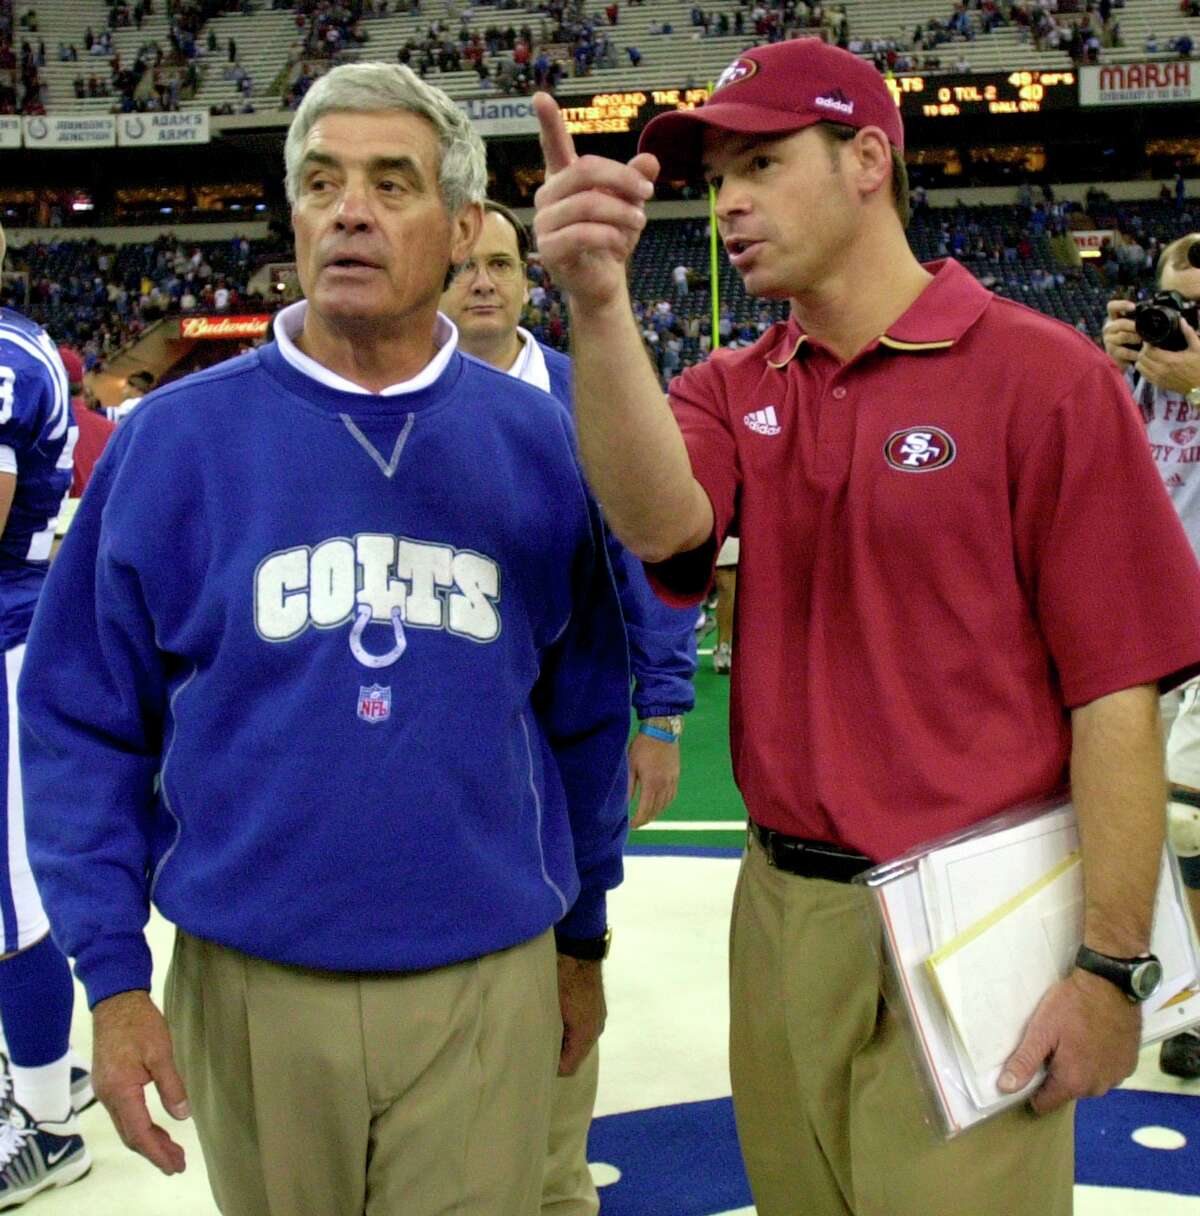 Indianapolis Colts head coach Jim Mora, left, is greeted by his son, San Francisco 49ers defensive coordinator Jim Mora following the game on Nov. 25, 2001, in Indianapolis. The younger Mora is back on the sideline as the new UConn football coach.